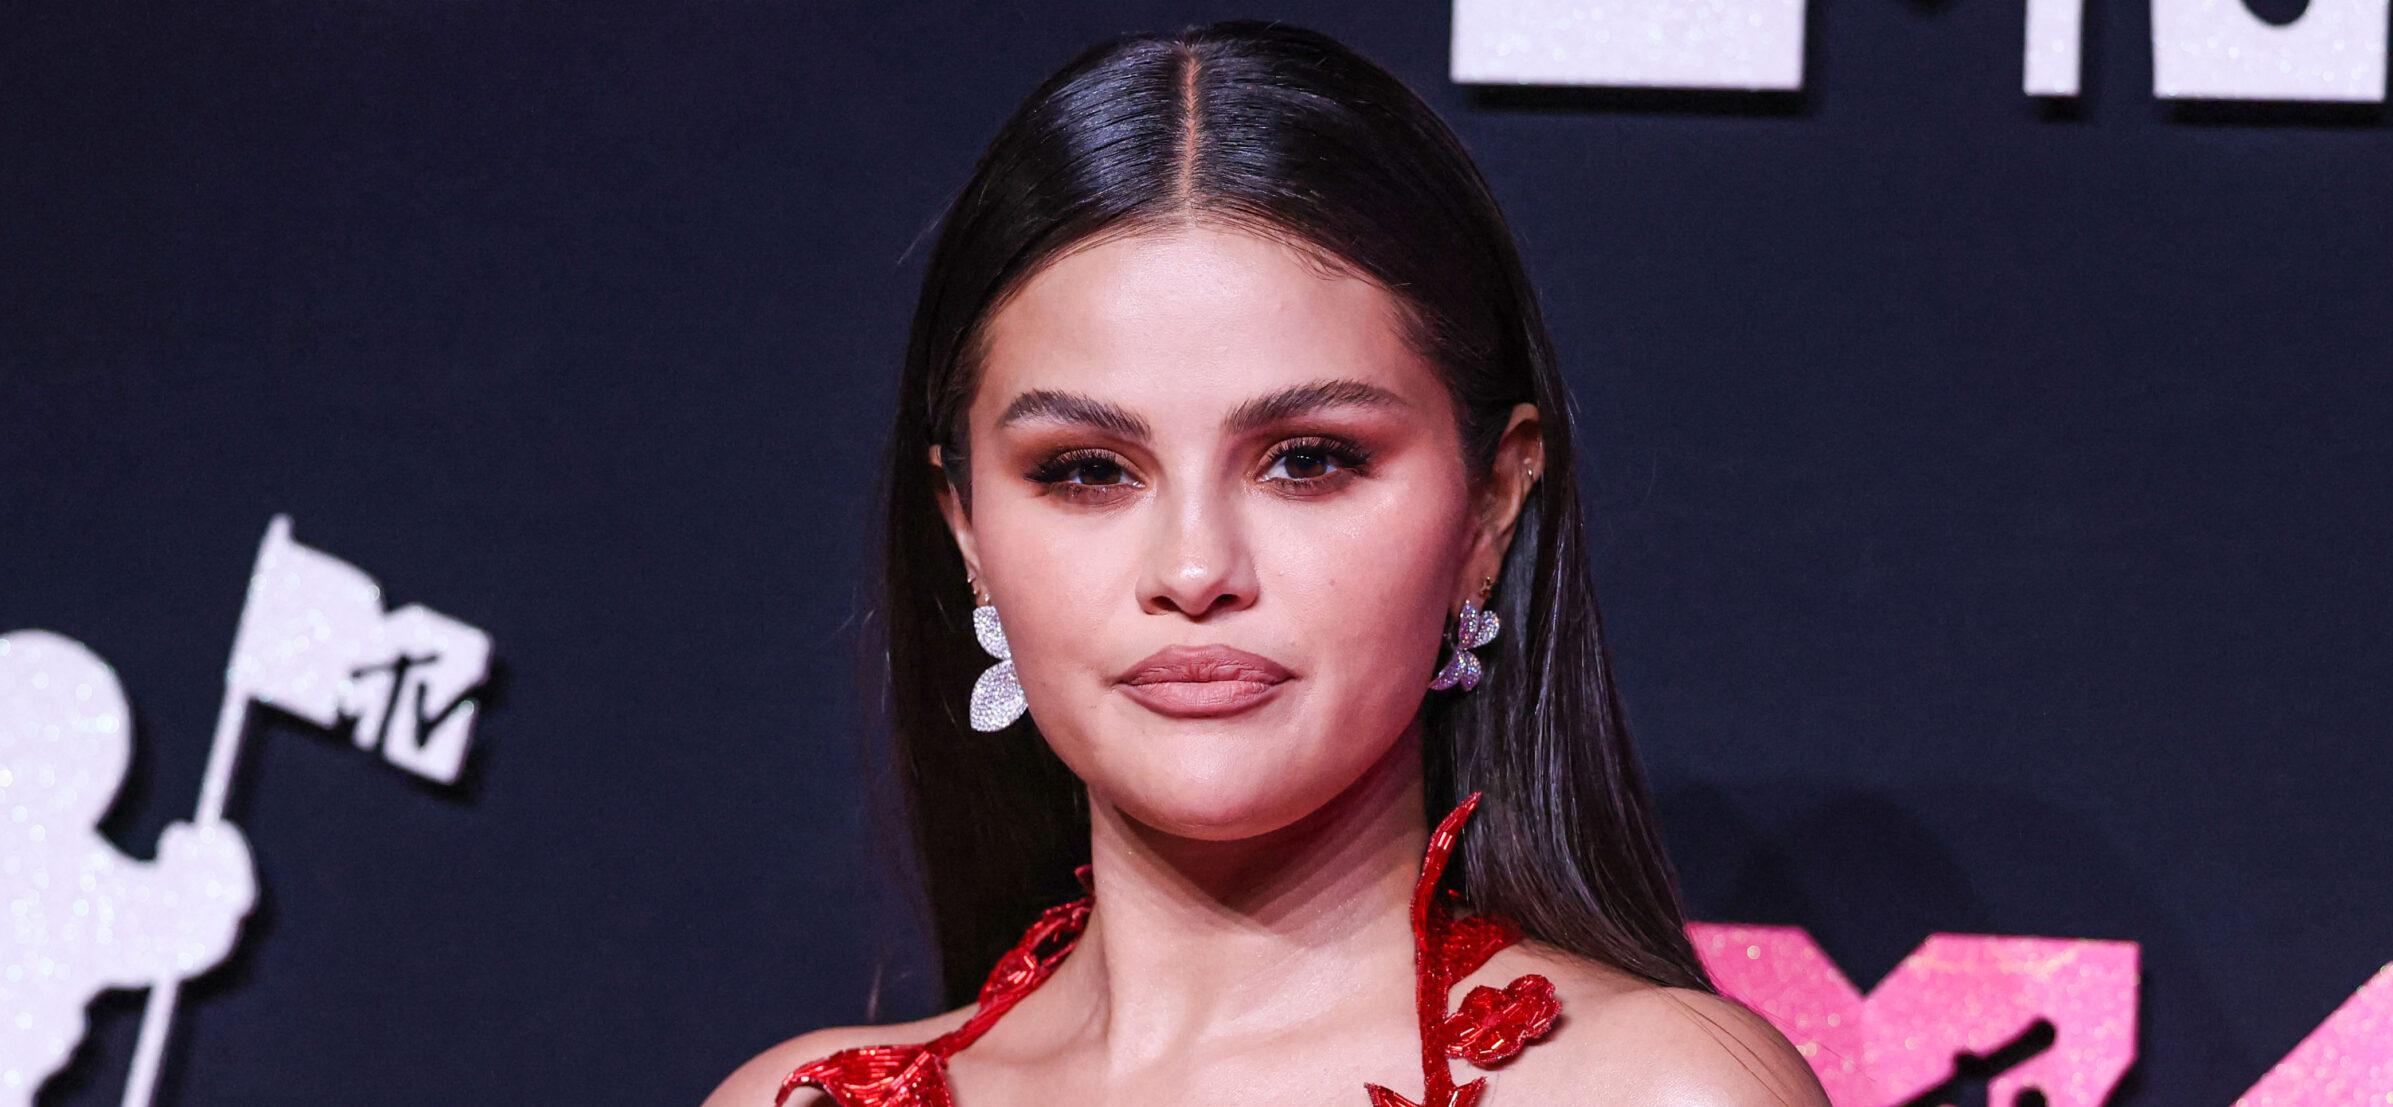 Selena Gomez Declares She Would Choose Acting Over Music: ‘I’m Tired’